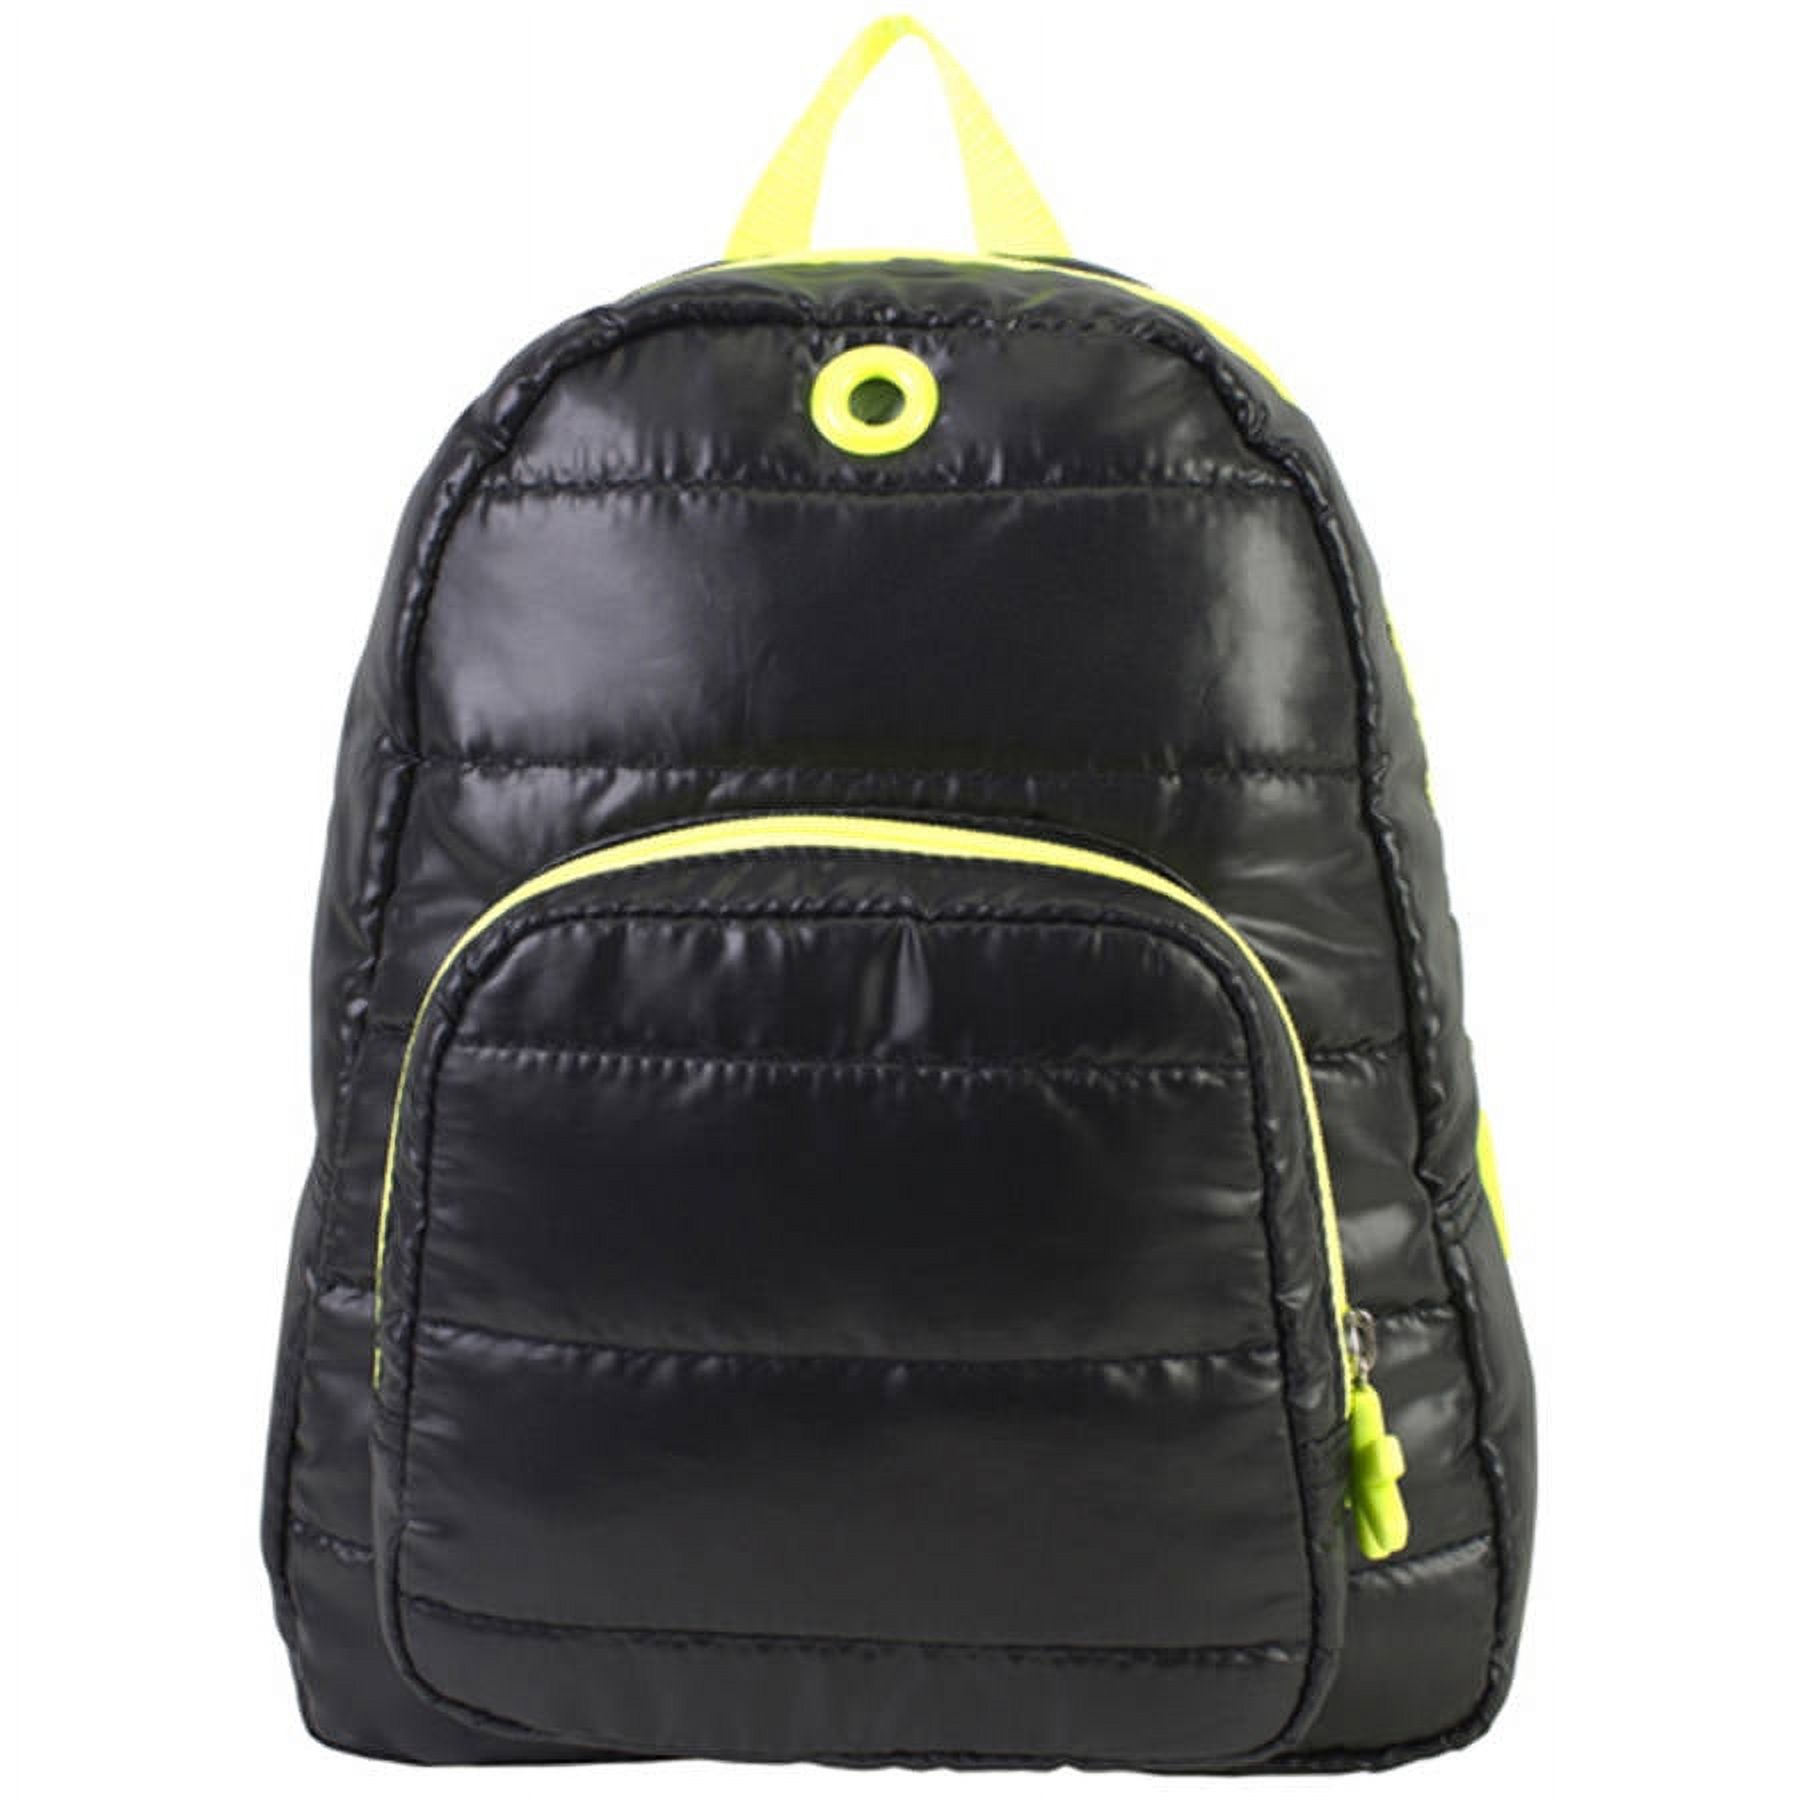 Fuel Ultra Lite Puffy Mini Backpack - image 2 of 4